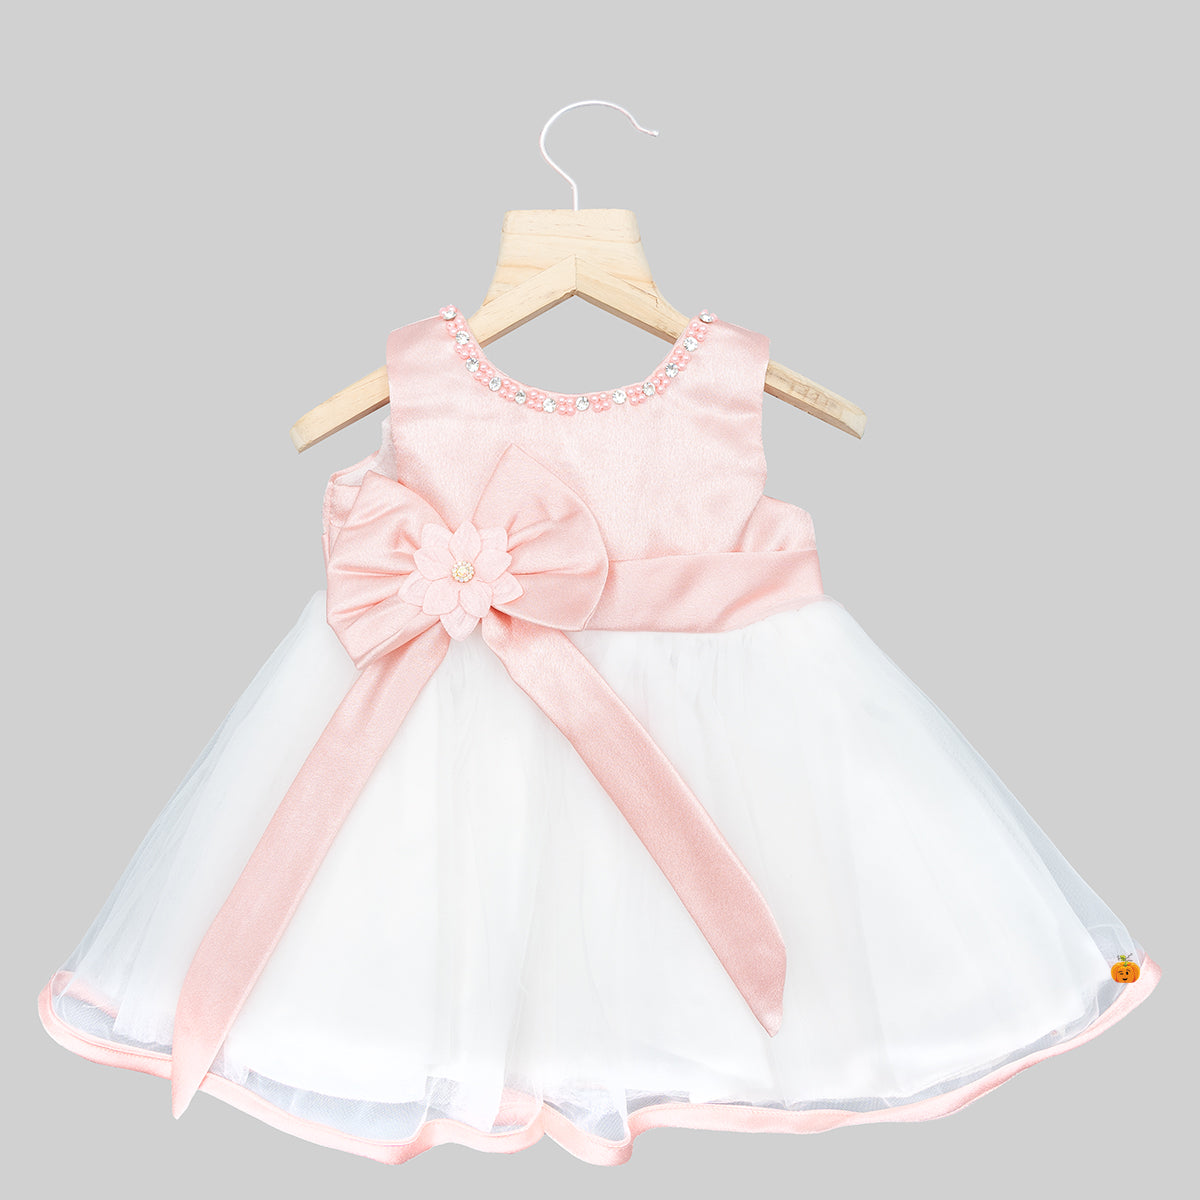 Girls party dress er children teenagers prom ceremonies gowns dresses